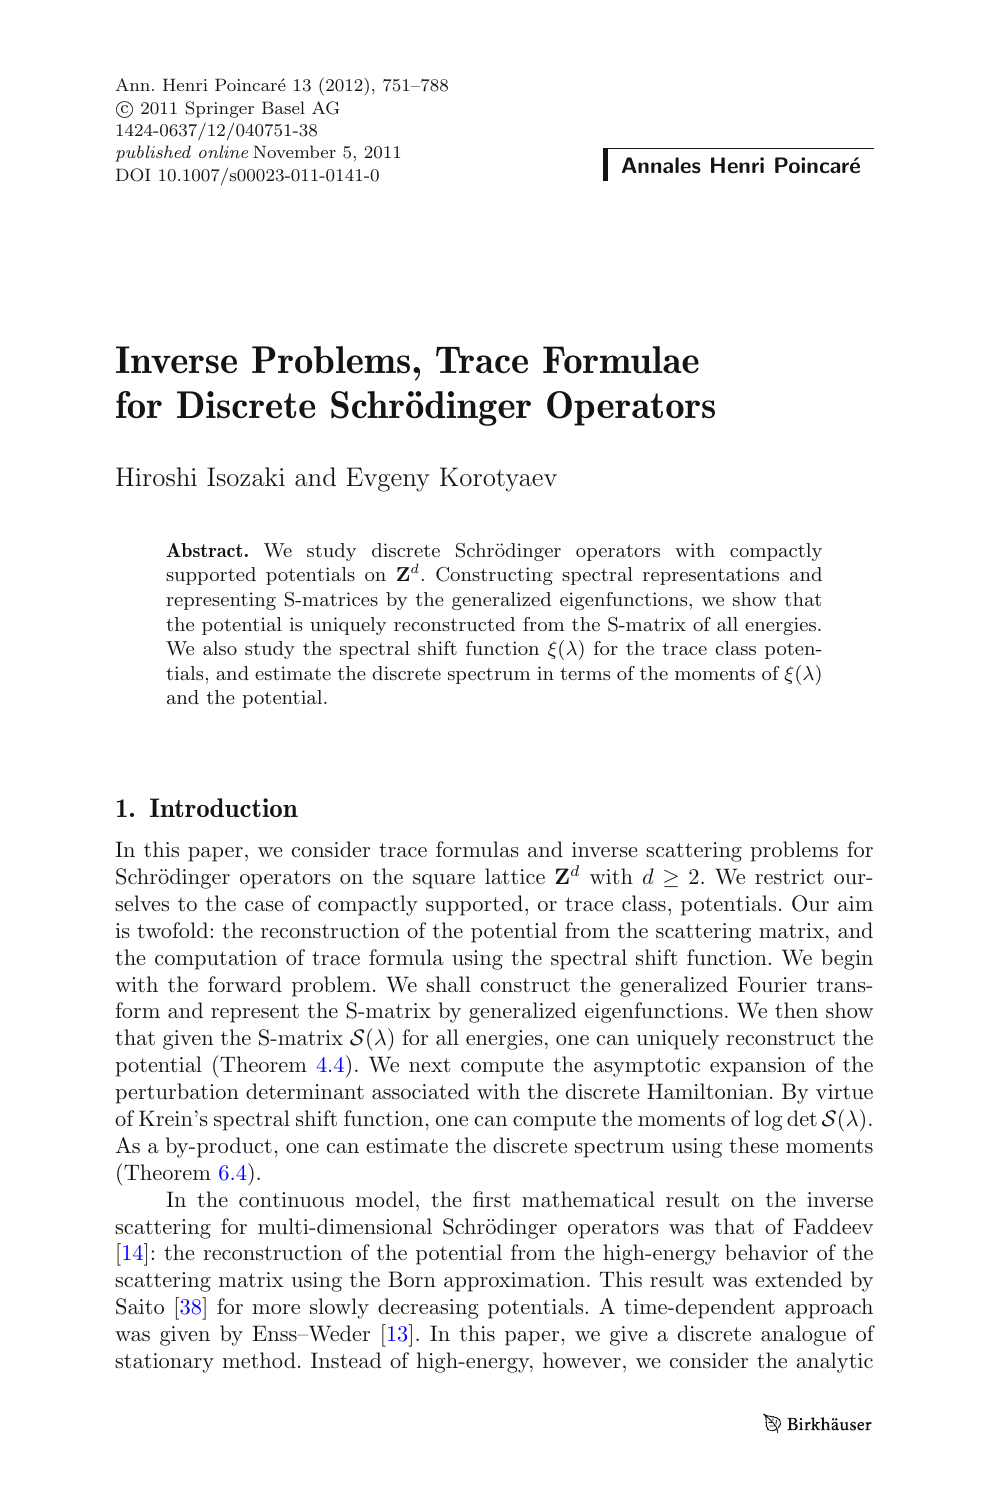 Inverse Problems Trace Formulae For Discrete Schrodinger Operators Topic Of Research Paper In Mathematics Download Scholarly Article Pdf And Read For Free On Cyberleninka Open Science Hub